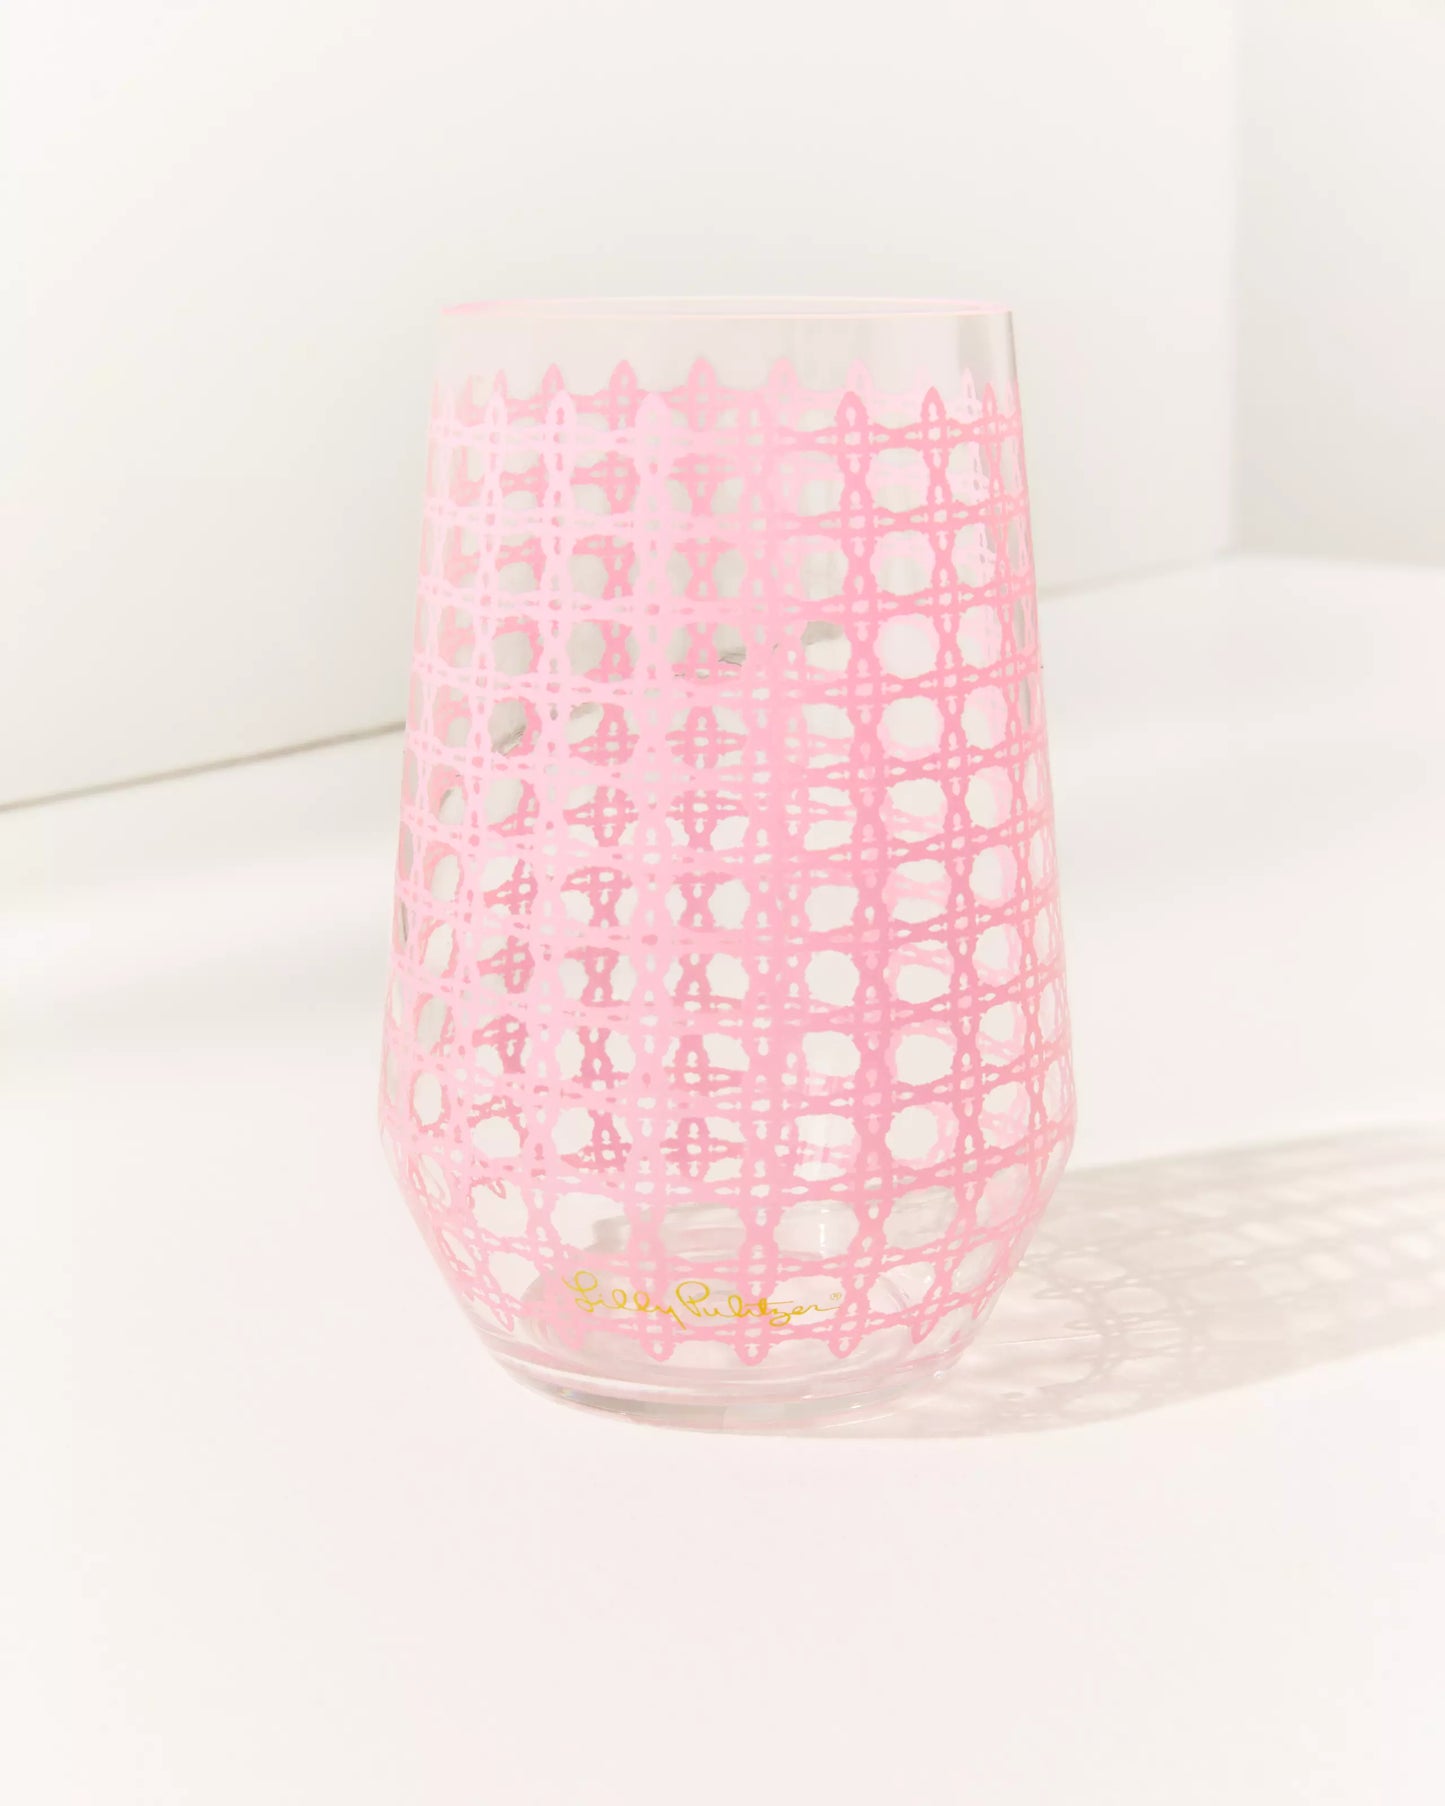 Lilly Pulitzer - Acrylic Wine Glass Set - Conch Shell Pink Caning - Findlay Rowe Designs